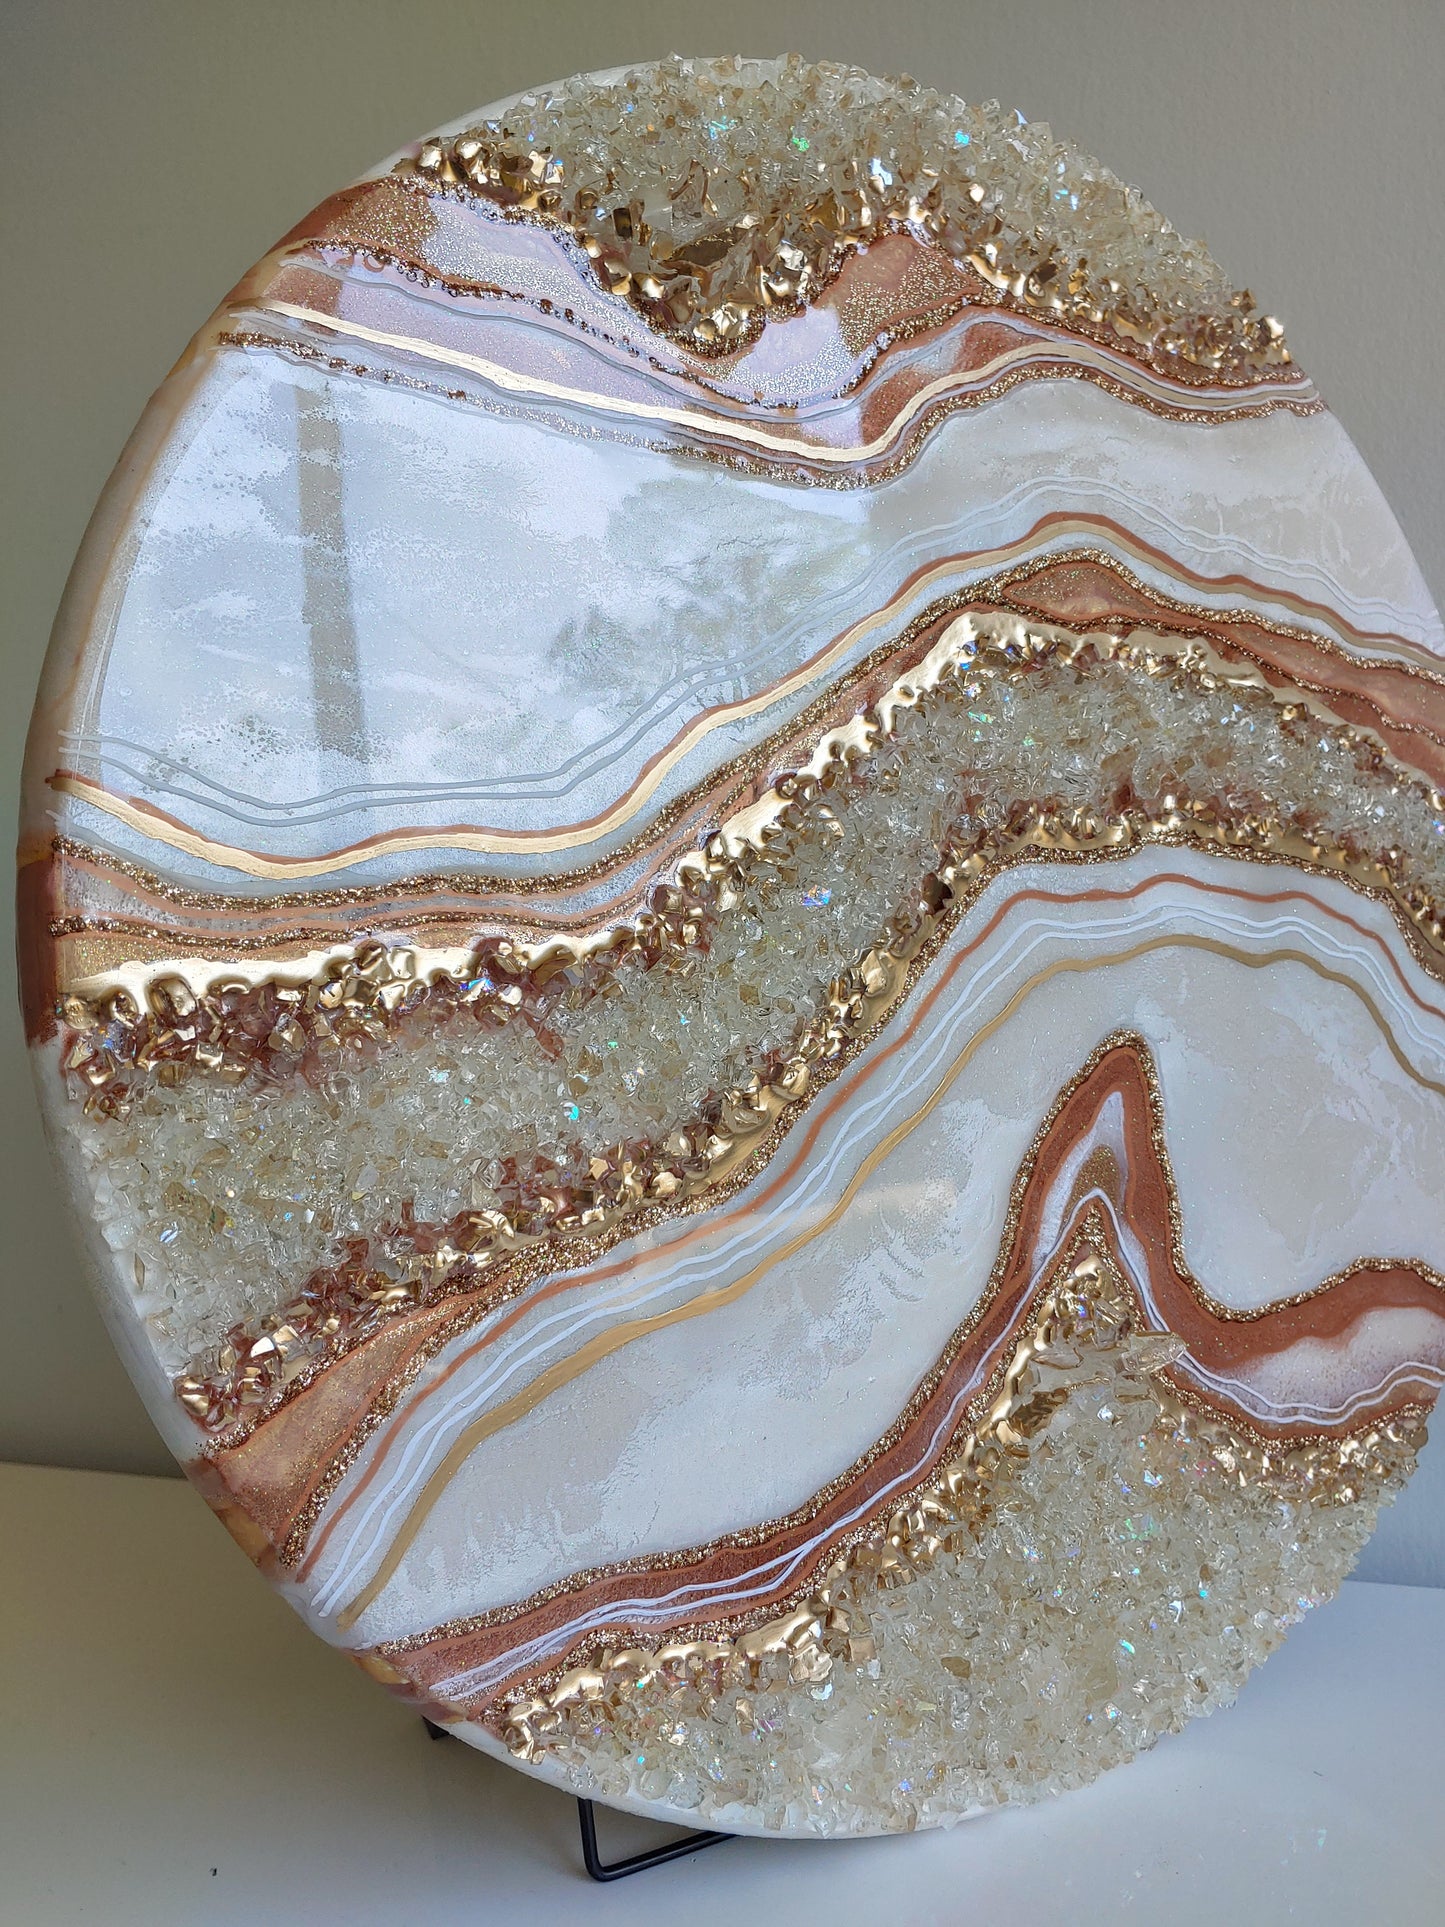 Rose Gold Geode artwork with glass on wood